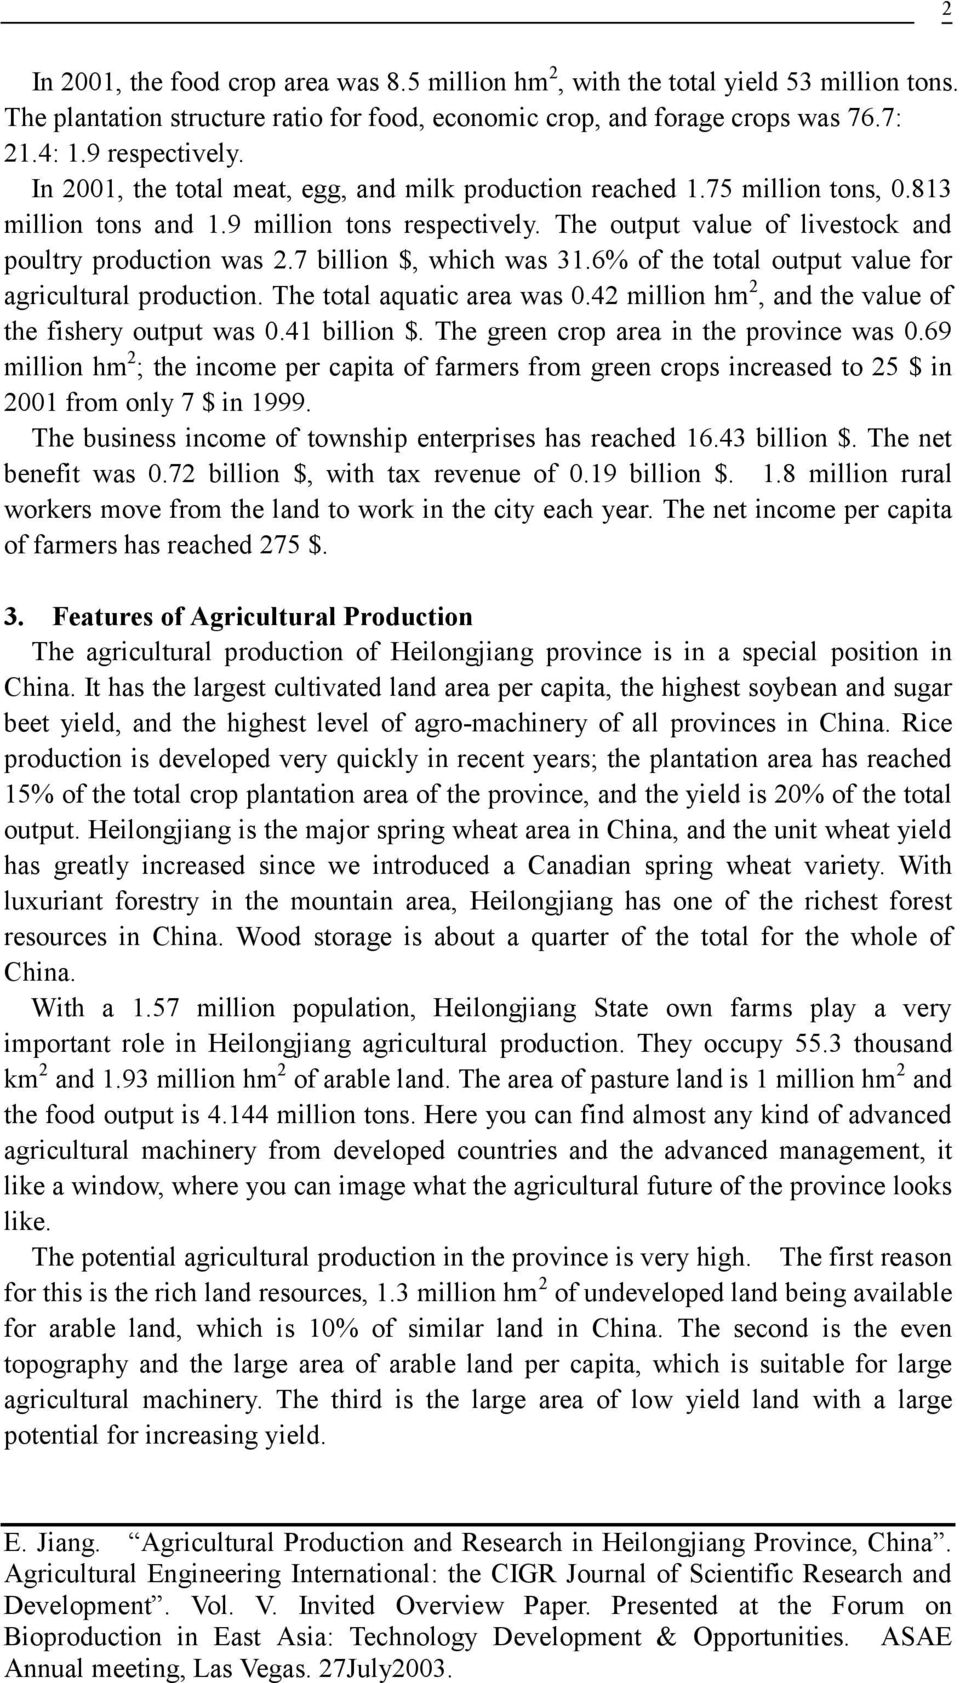 7 billion $, which was 31.6% of the total output value for agricultural production. The total aquatic area was 0.42 million hm 2, and the value of the fishery output was 0.41 billion $.